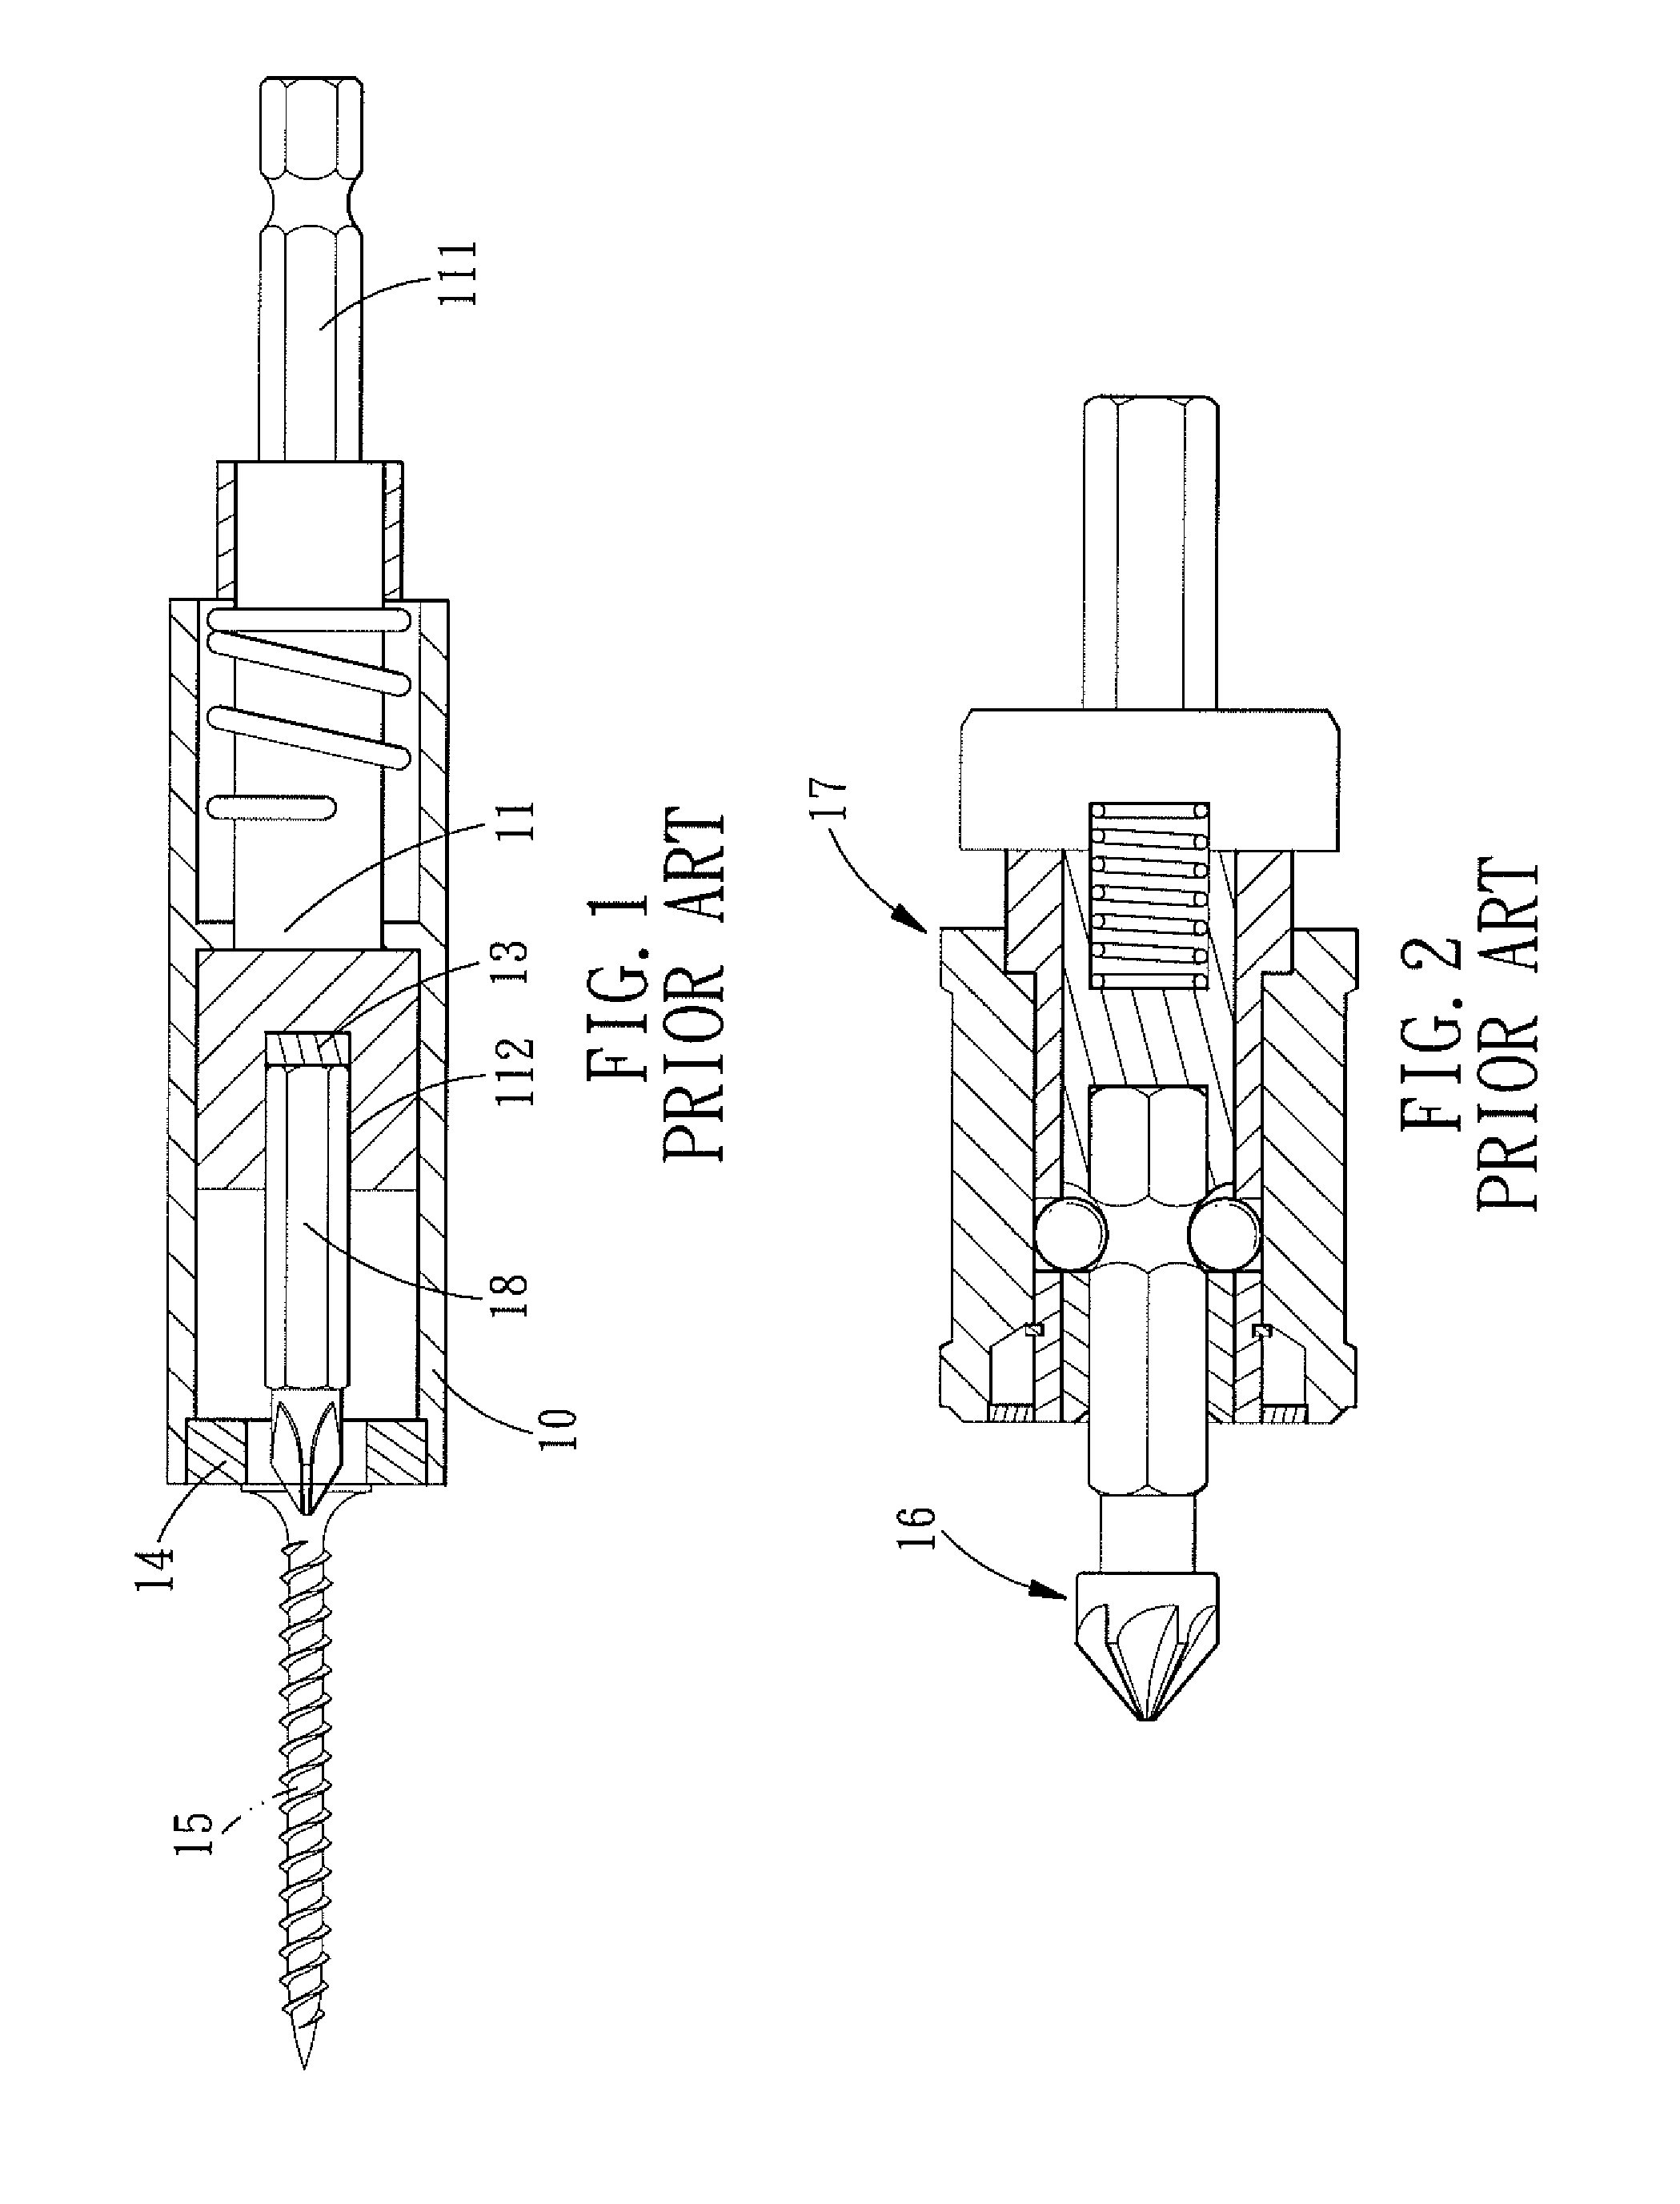 Connector structure with a detachable mounting tube